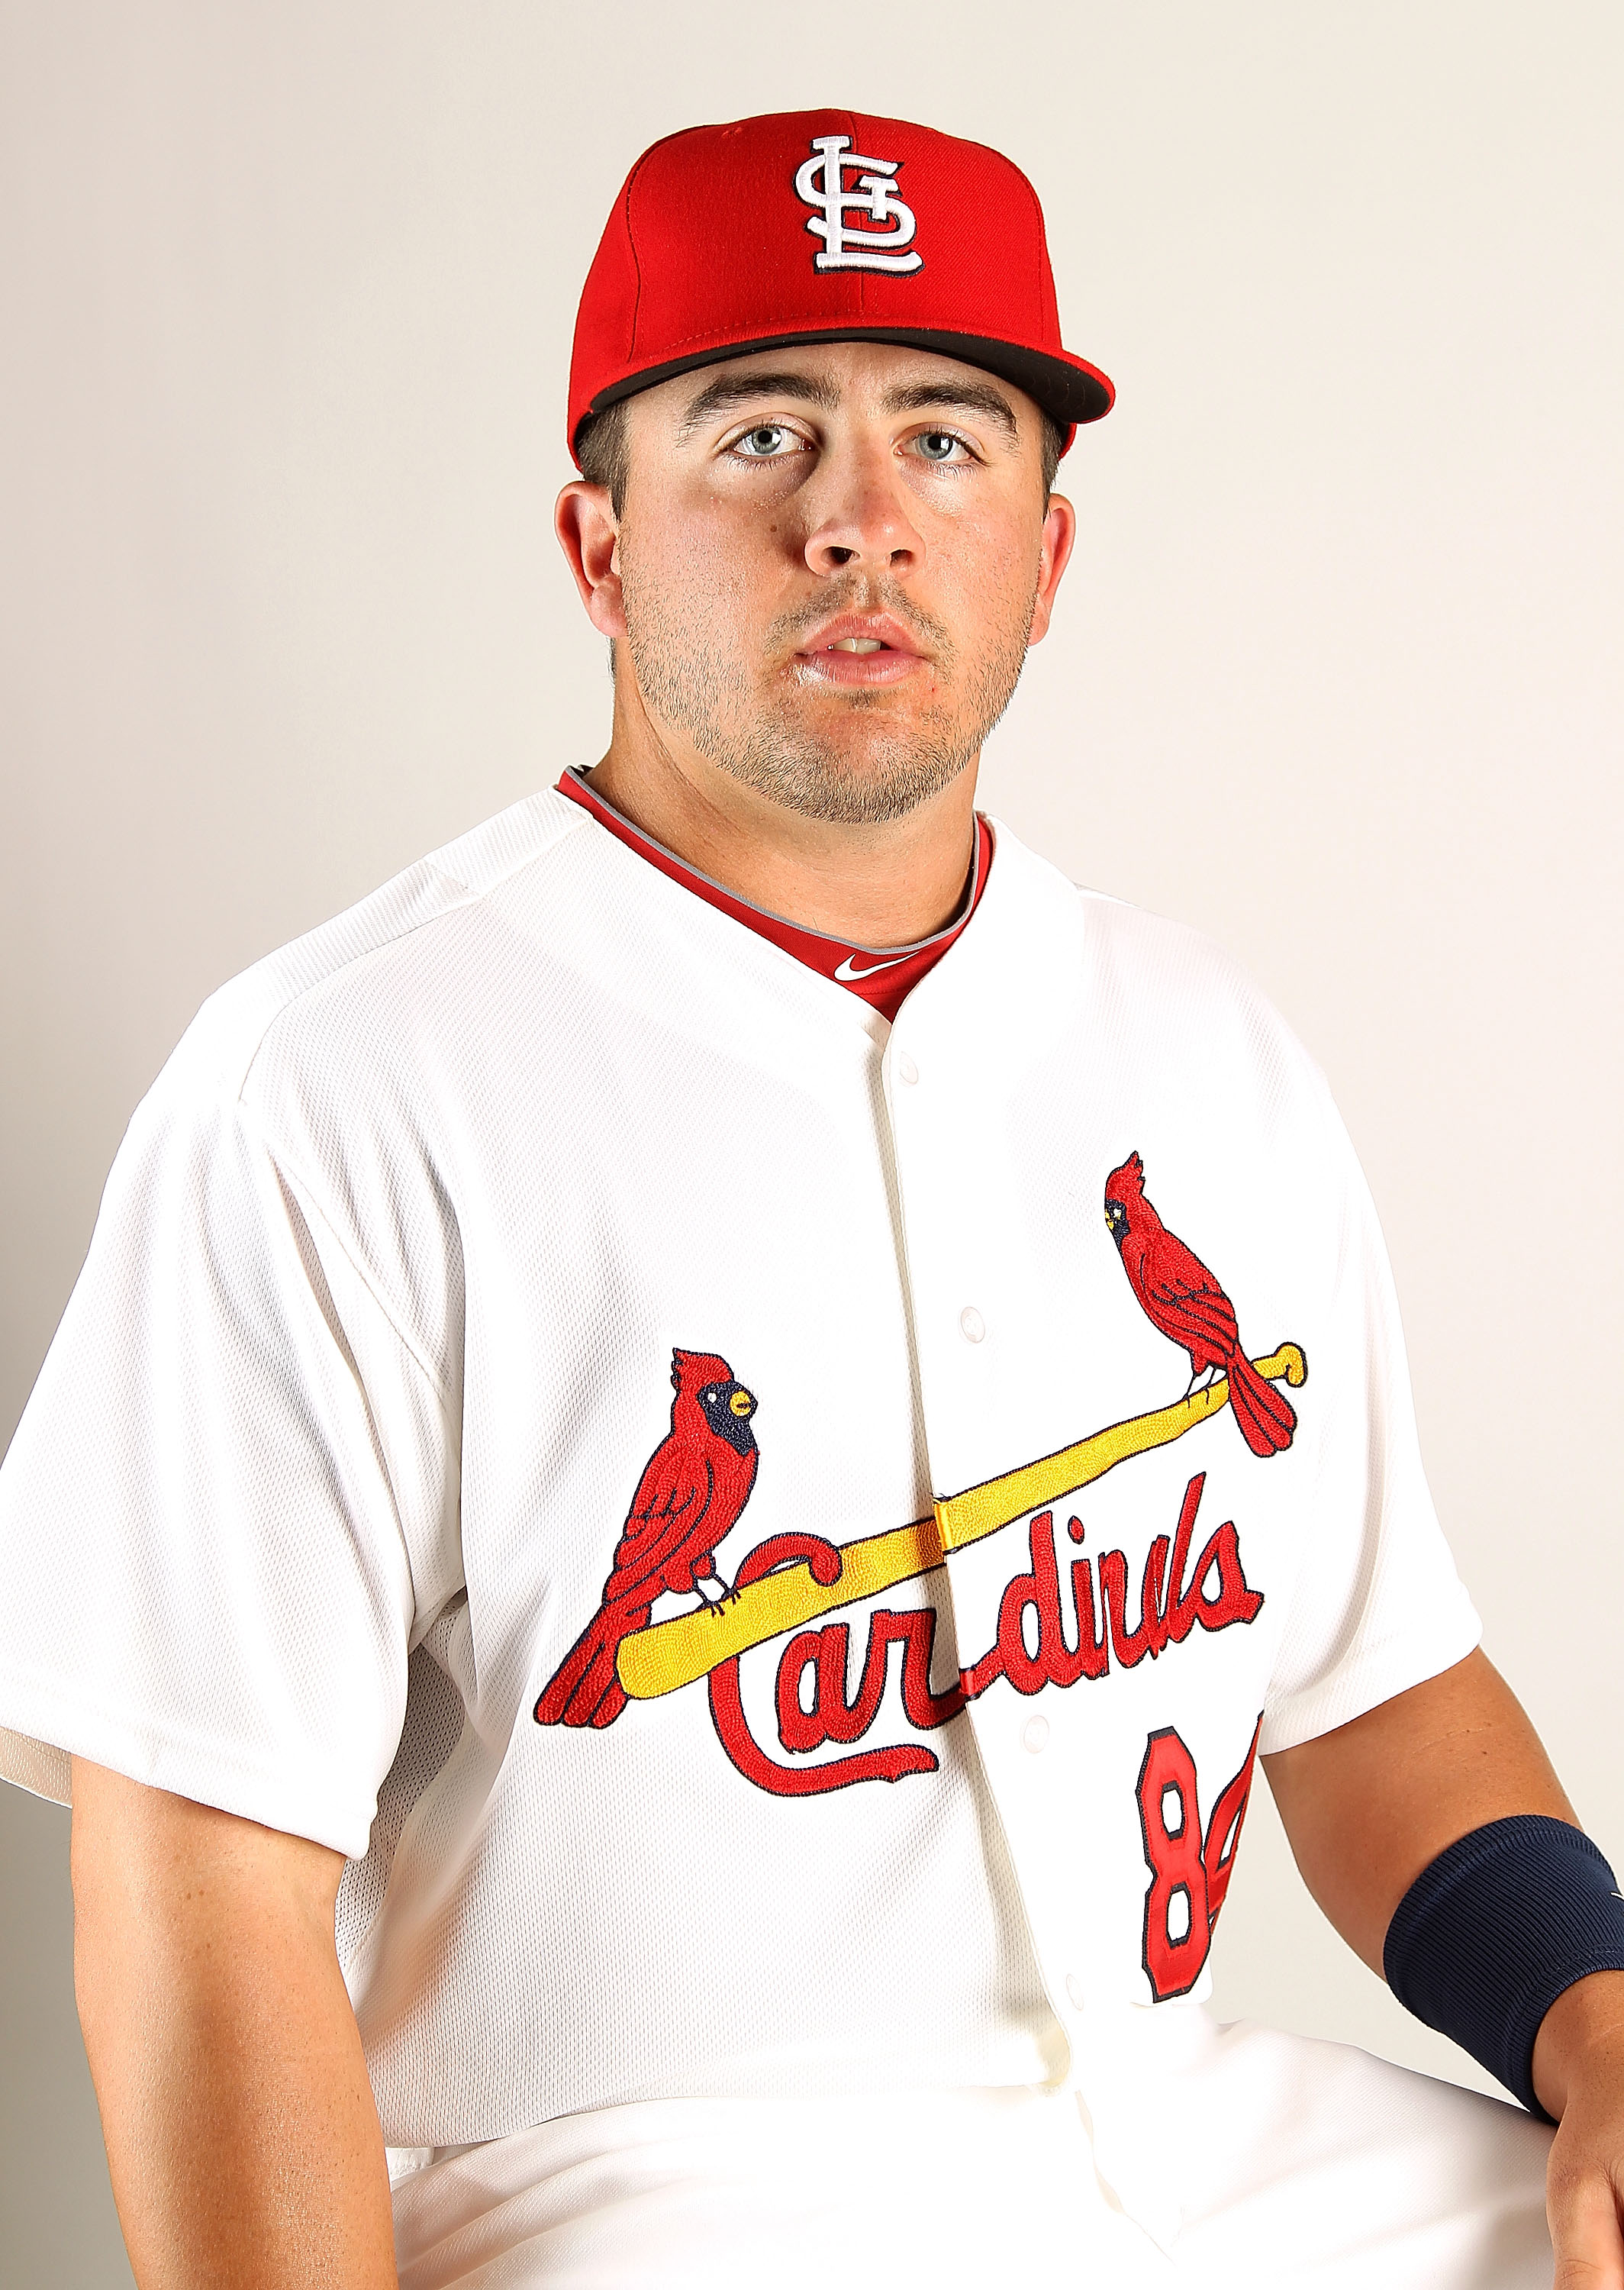 JUPITER, FL - FEBRUARY 24: Zack Cox #84 of the St. Louis Cardinals during Photo Day at Roger Dean Stadium on February 24, 2011 in Jupiter, Florida.  (Photo by Mike Ehrmann/Getty Images)